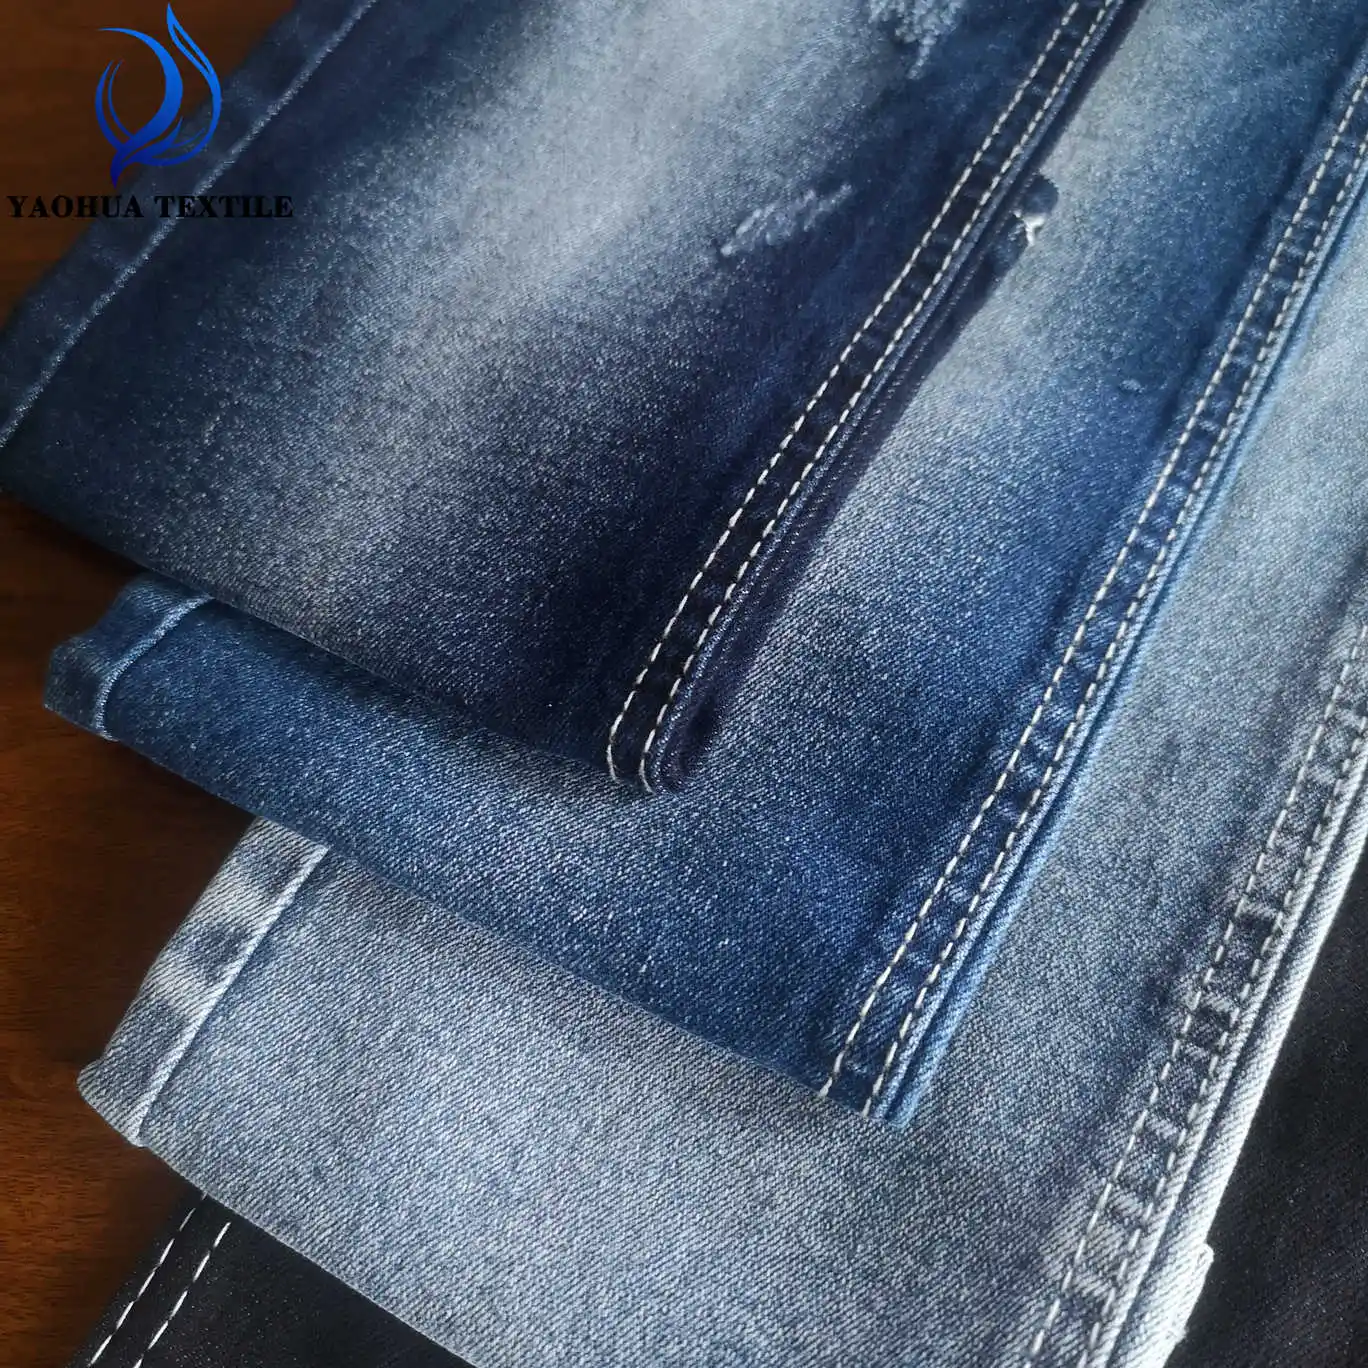 332 Hot sell woven Soft hand feeling full lycra 10.2oz denim fabric textiles good price for lady skinny jeans